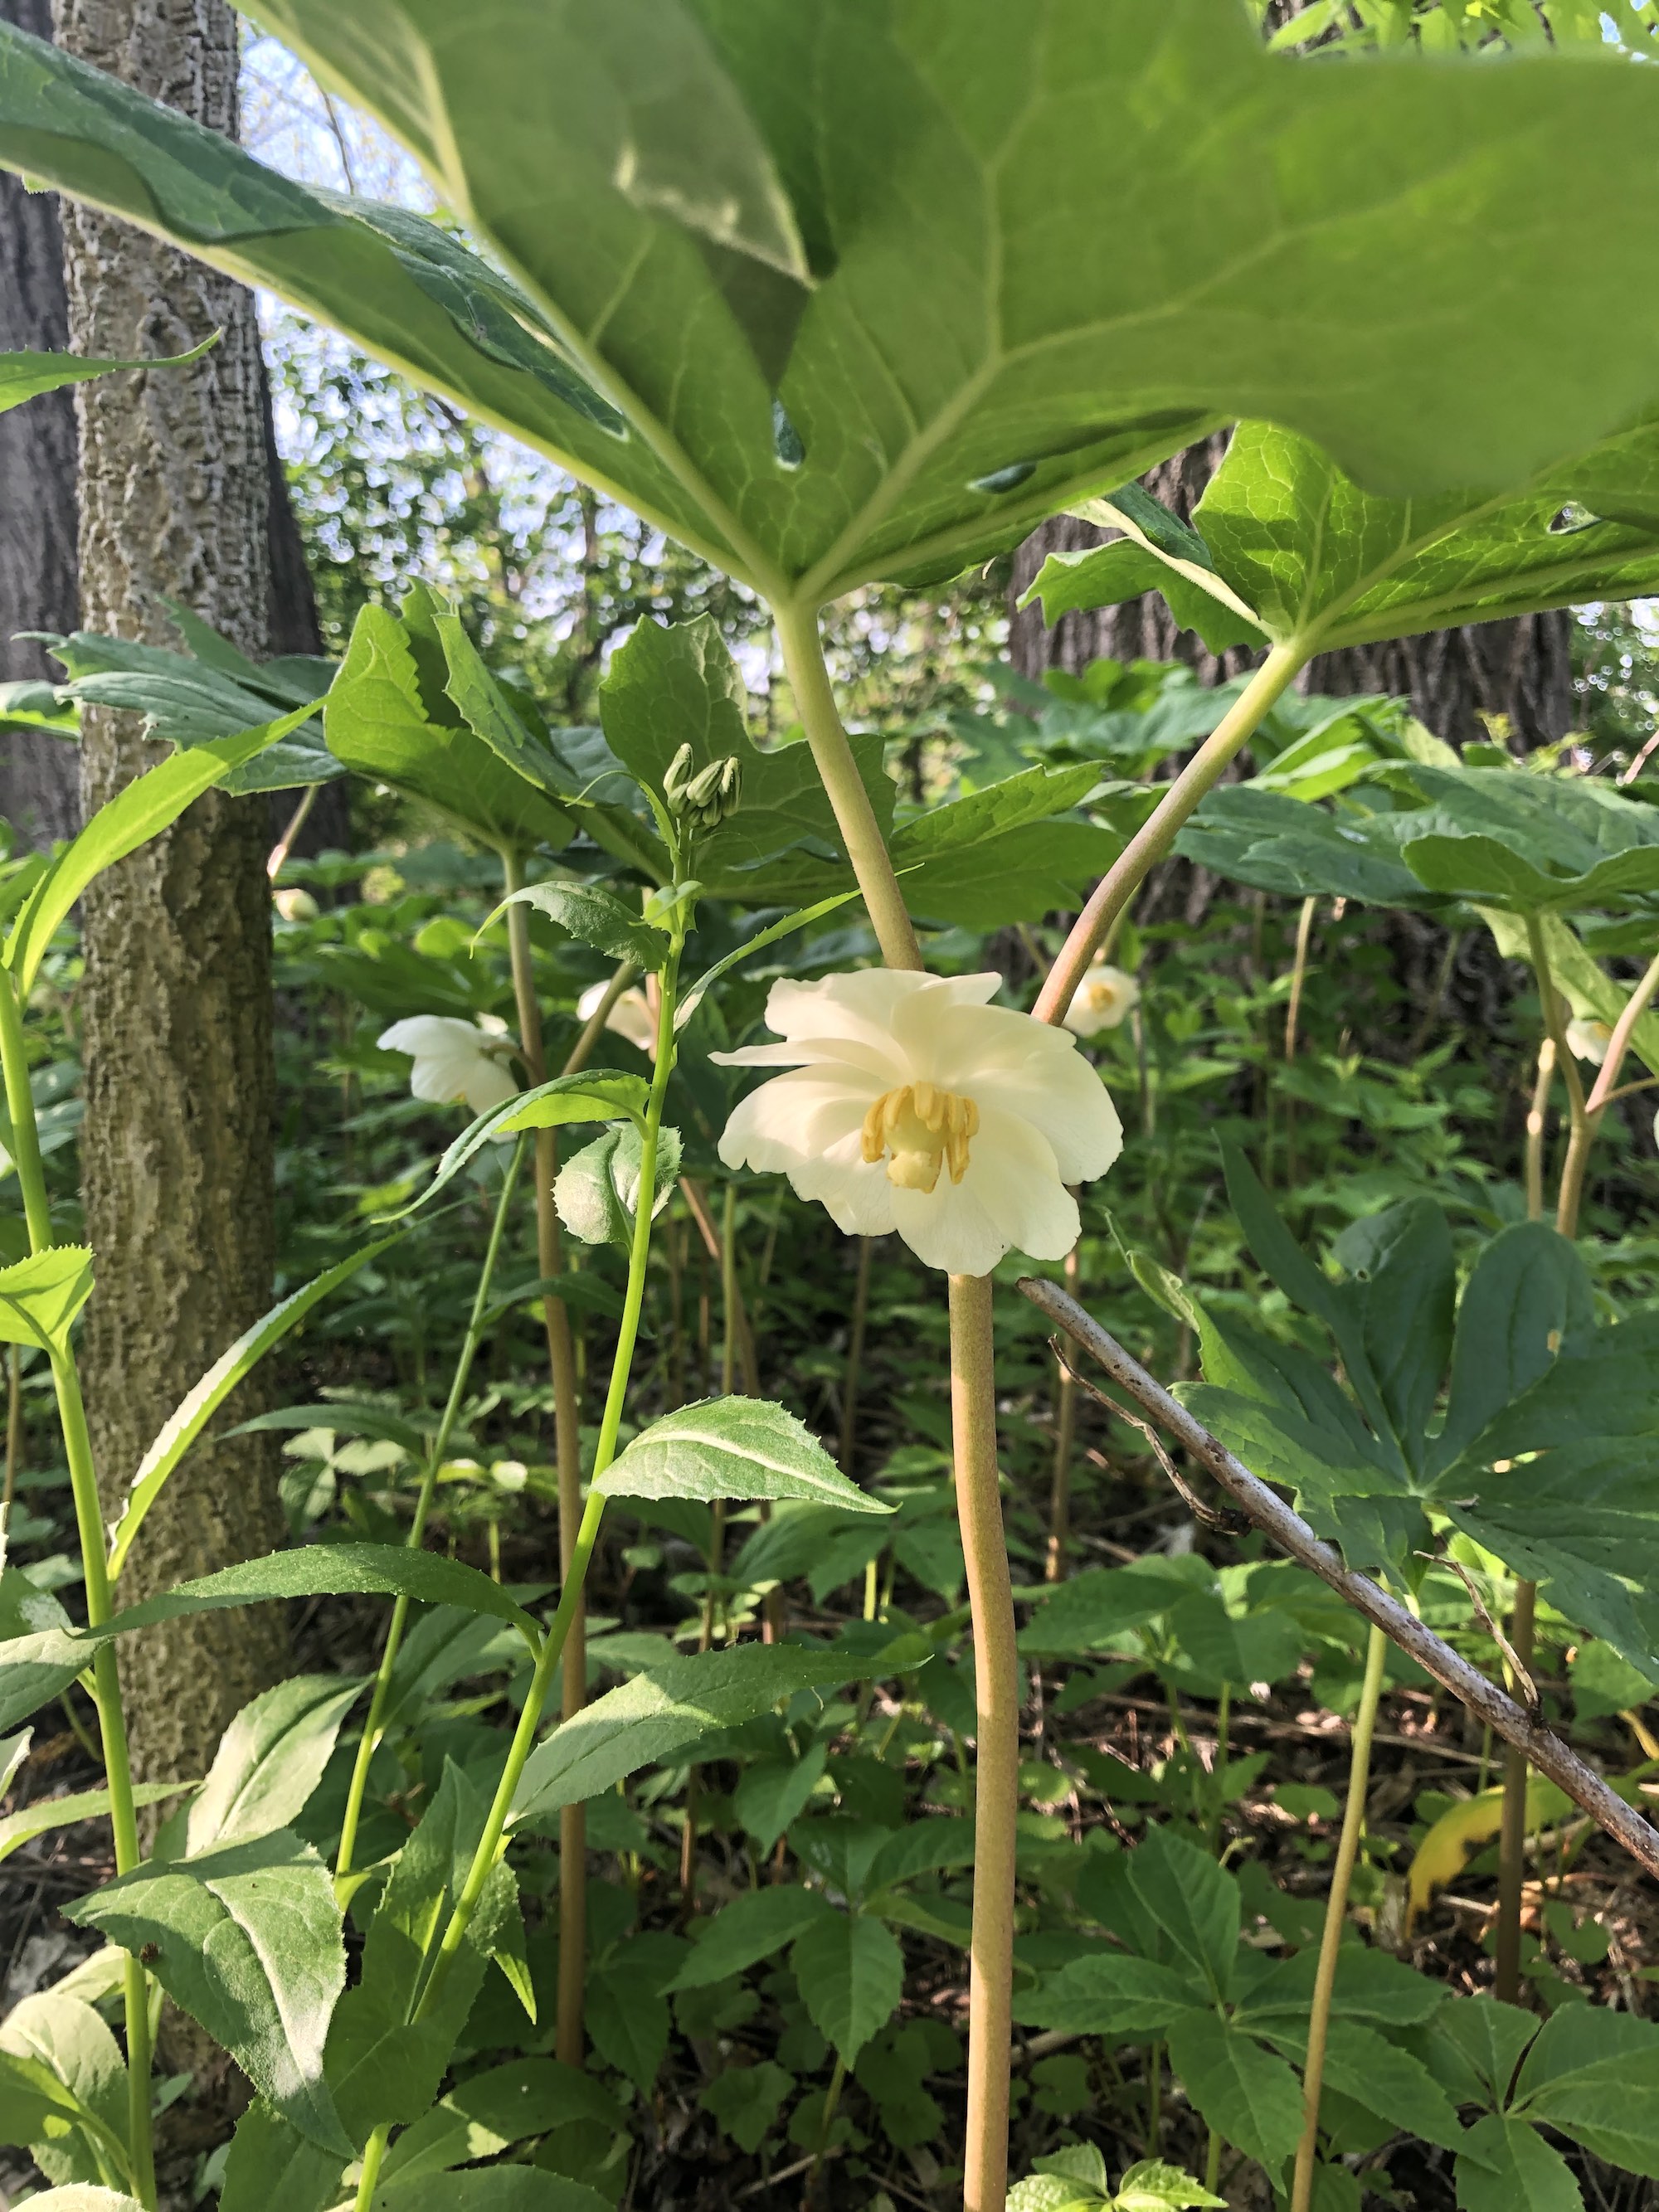 Mayapple blooms between Duck Pond and Marion Dunn Madison, Wisconsin on May 17, 2021.